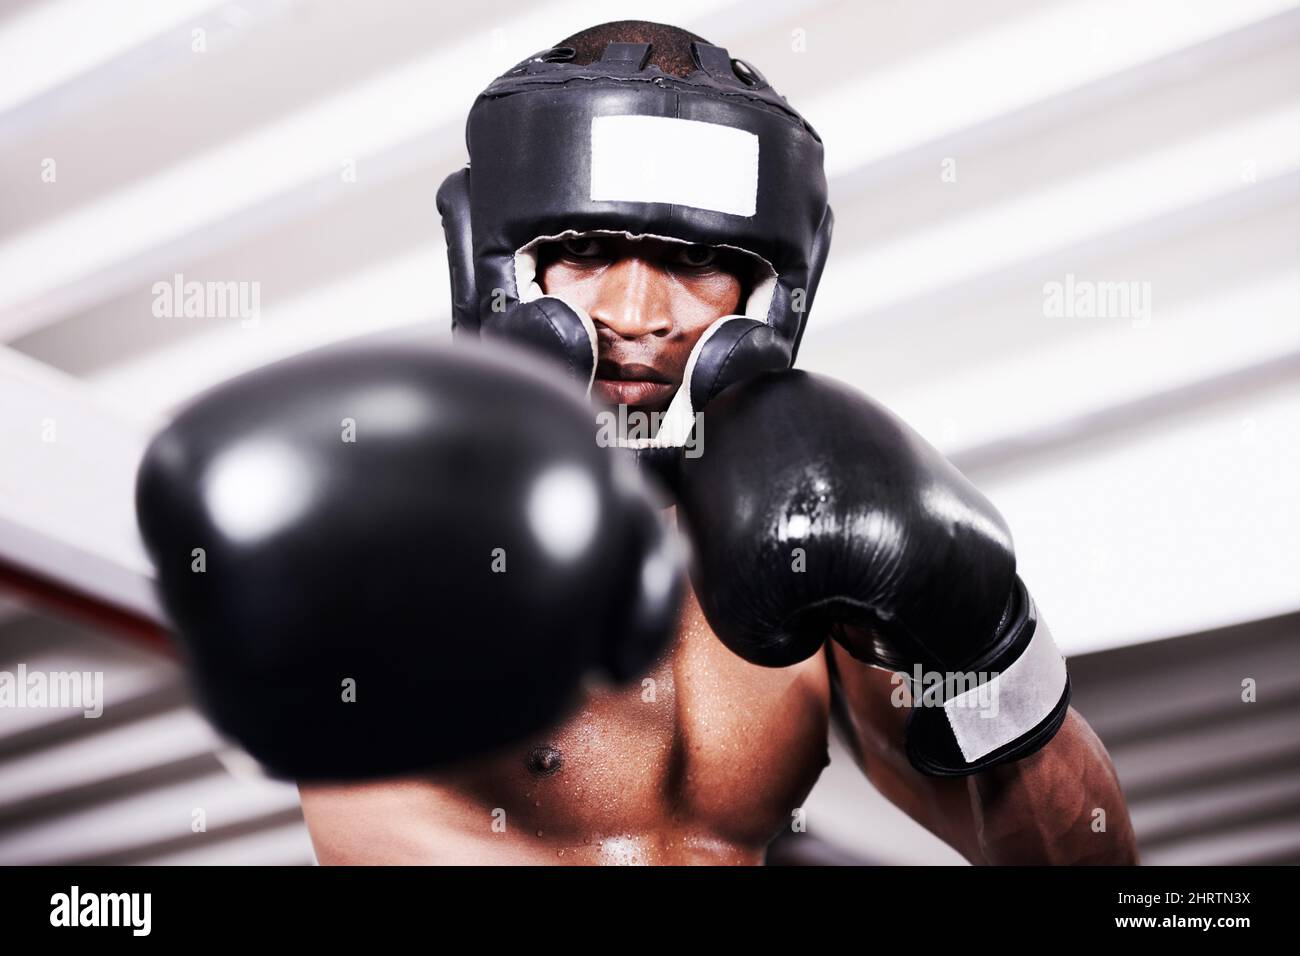 Ill take you one. An african american boxer wearing protective gear standing in the ring. Stock Photo